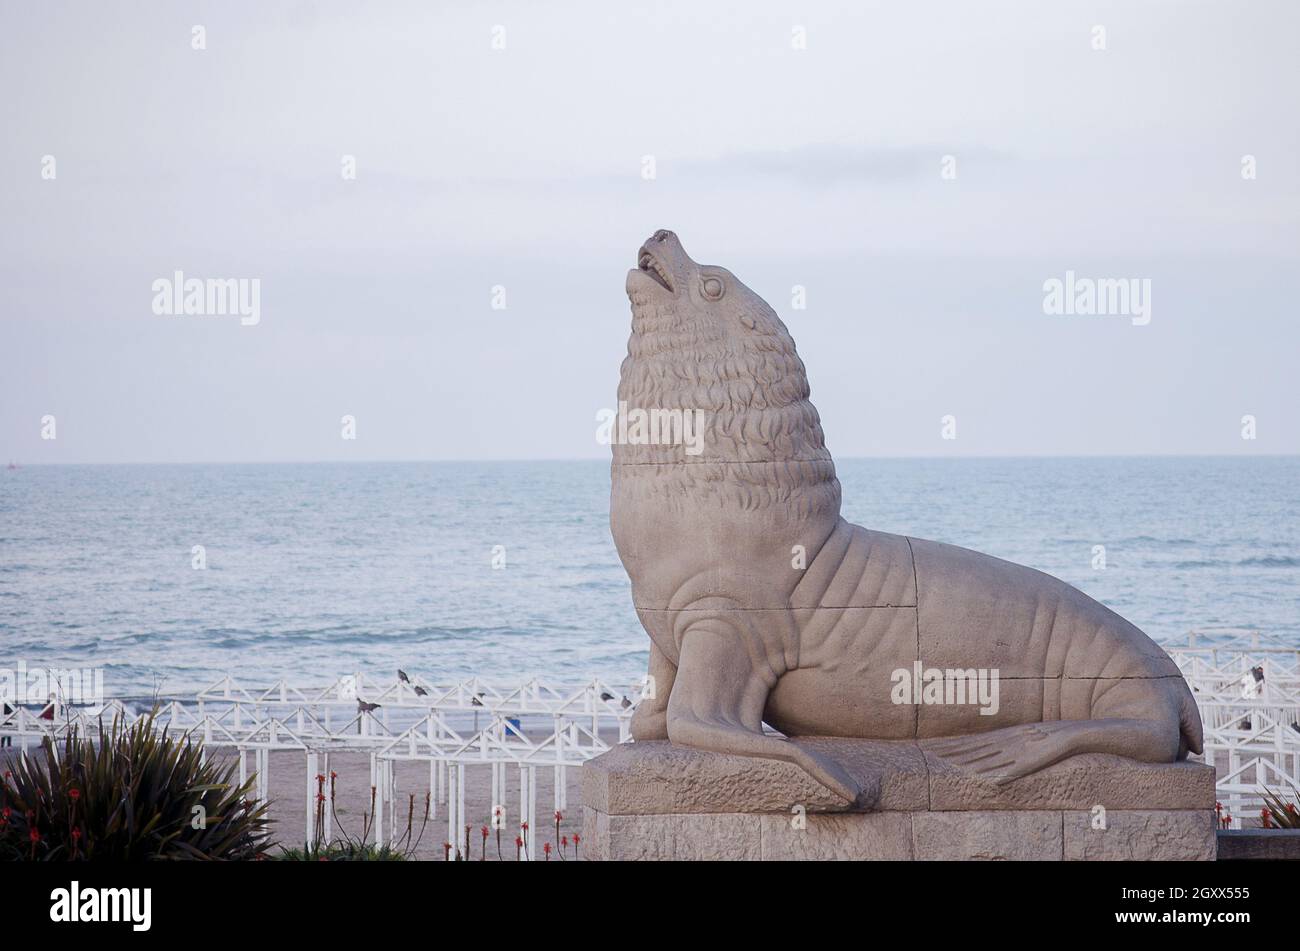 Waterfront with sea lion sculpture, Mar del Plata, Buenos Aires, Argentina Stock Photo